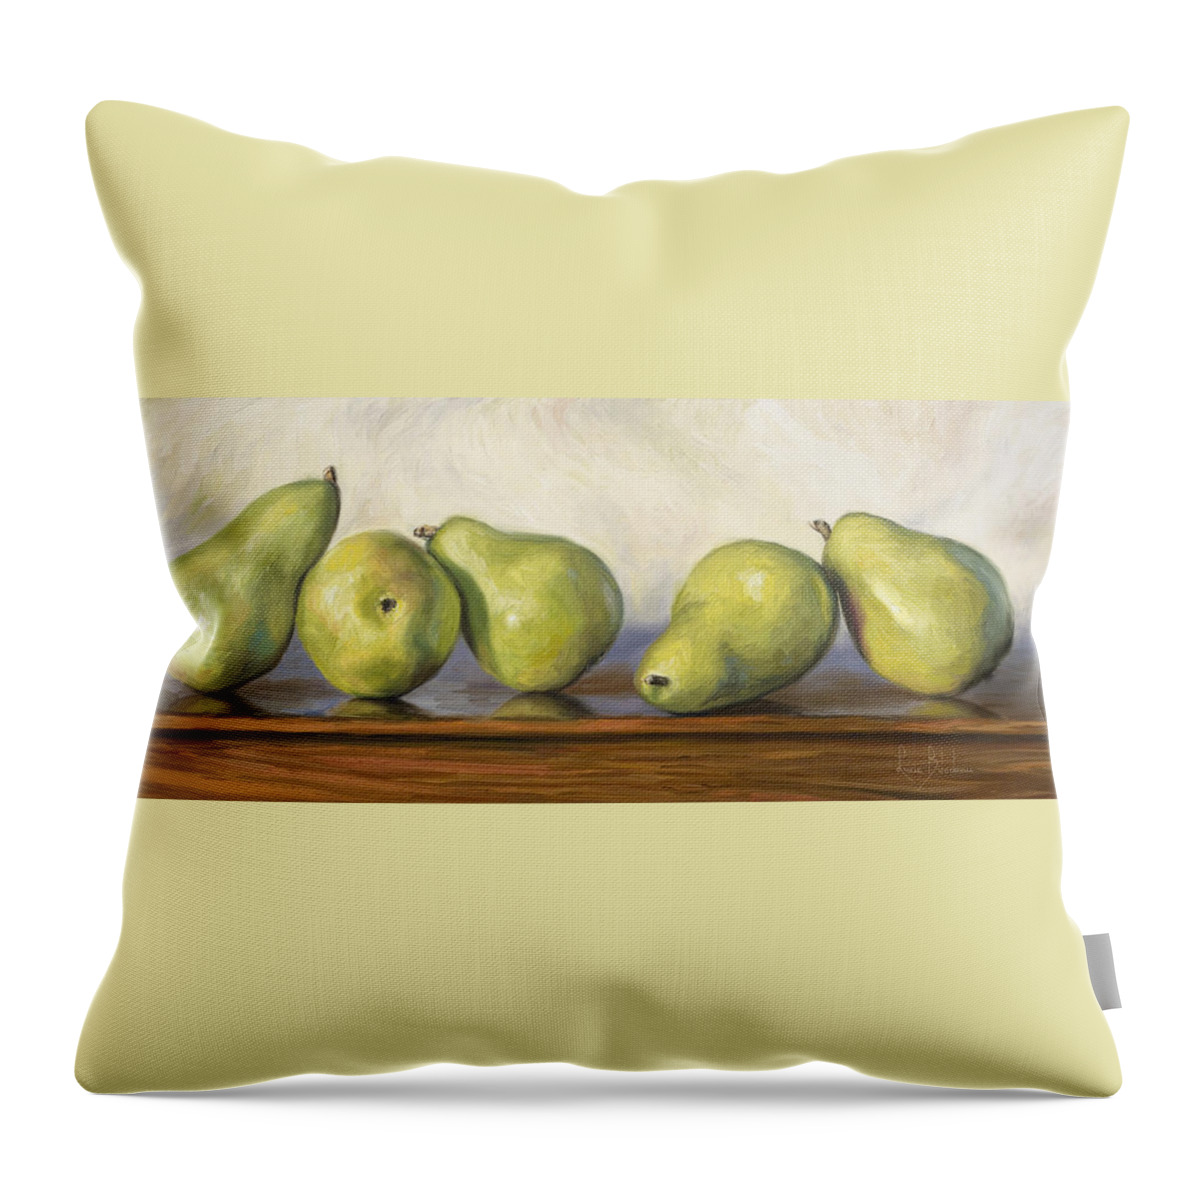 Still Life Throw Pillow featuring the painting Anjou Pears by Lucie Bilodeau